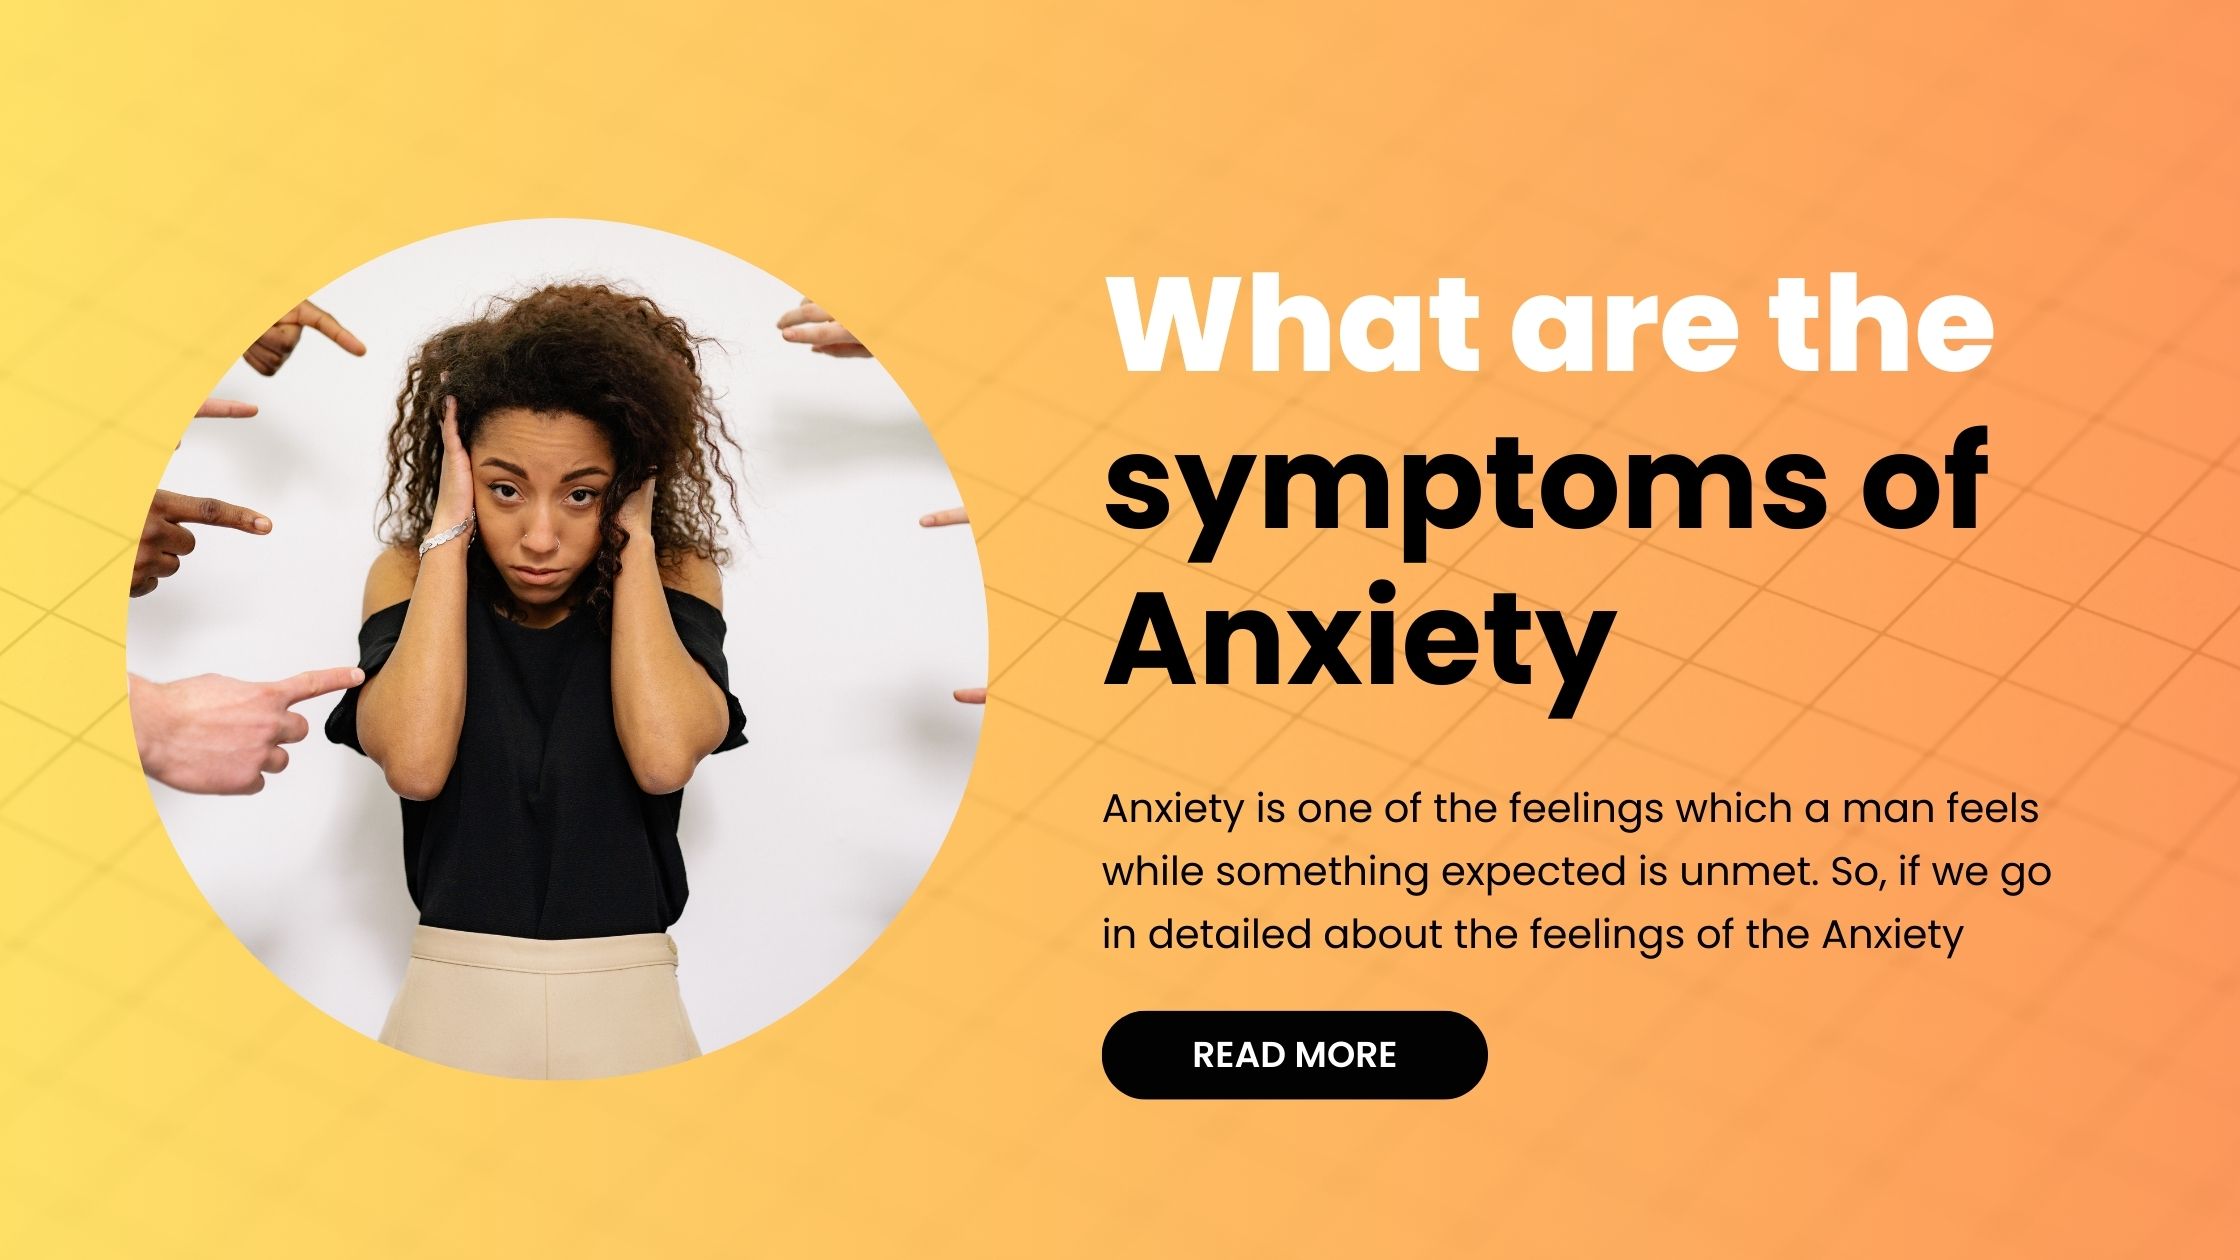 What are the symptoms of Anxiety